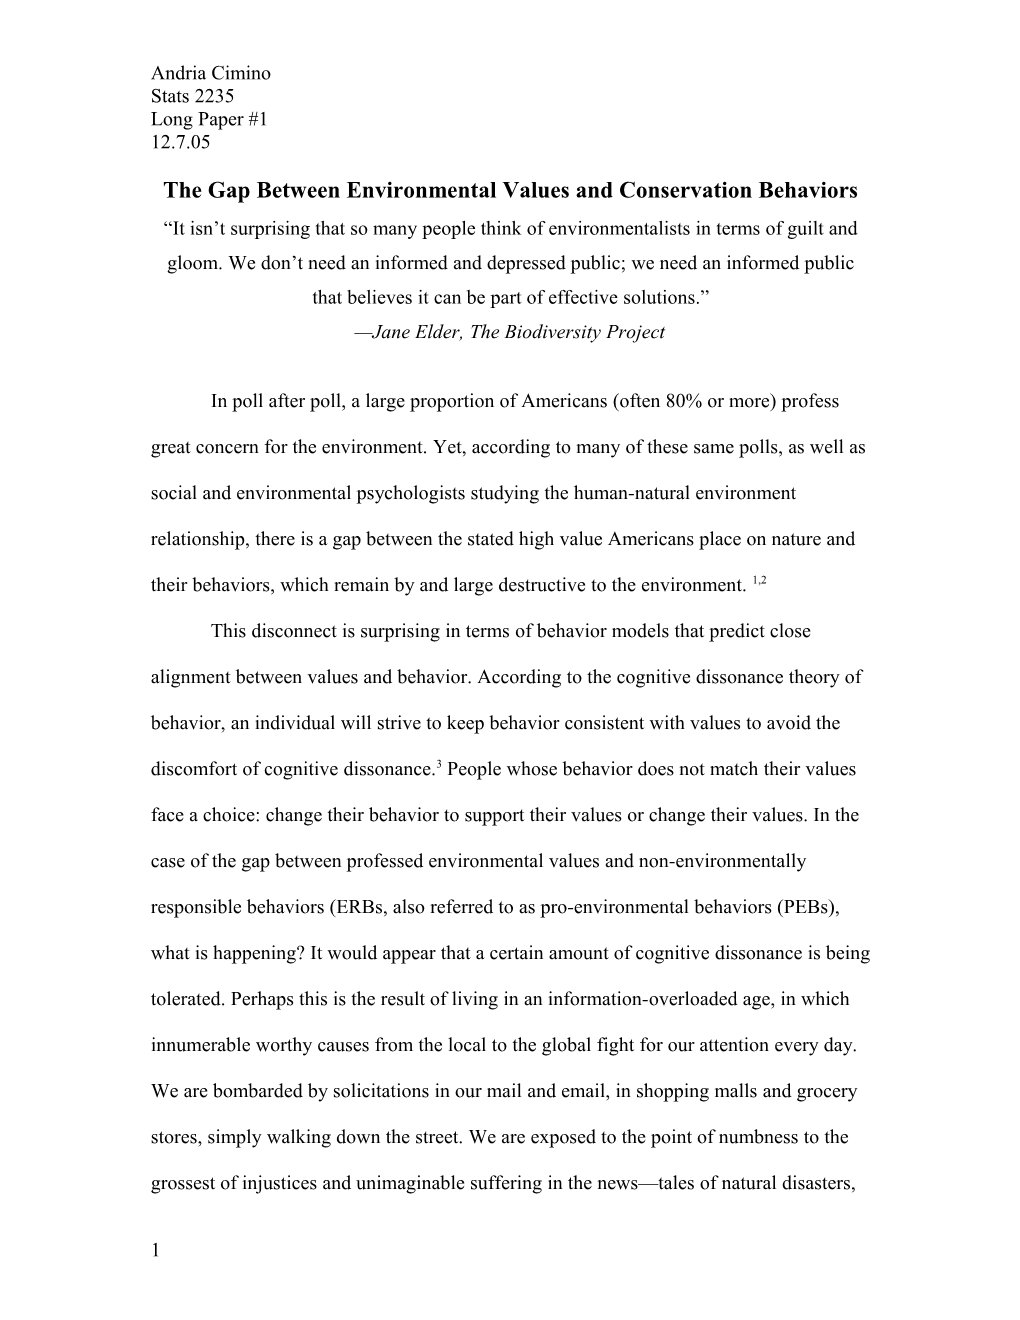 The Gap Between Environmental Values and Conservation Behaviors